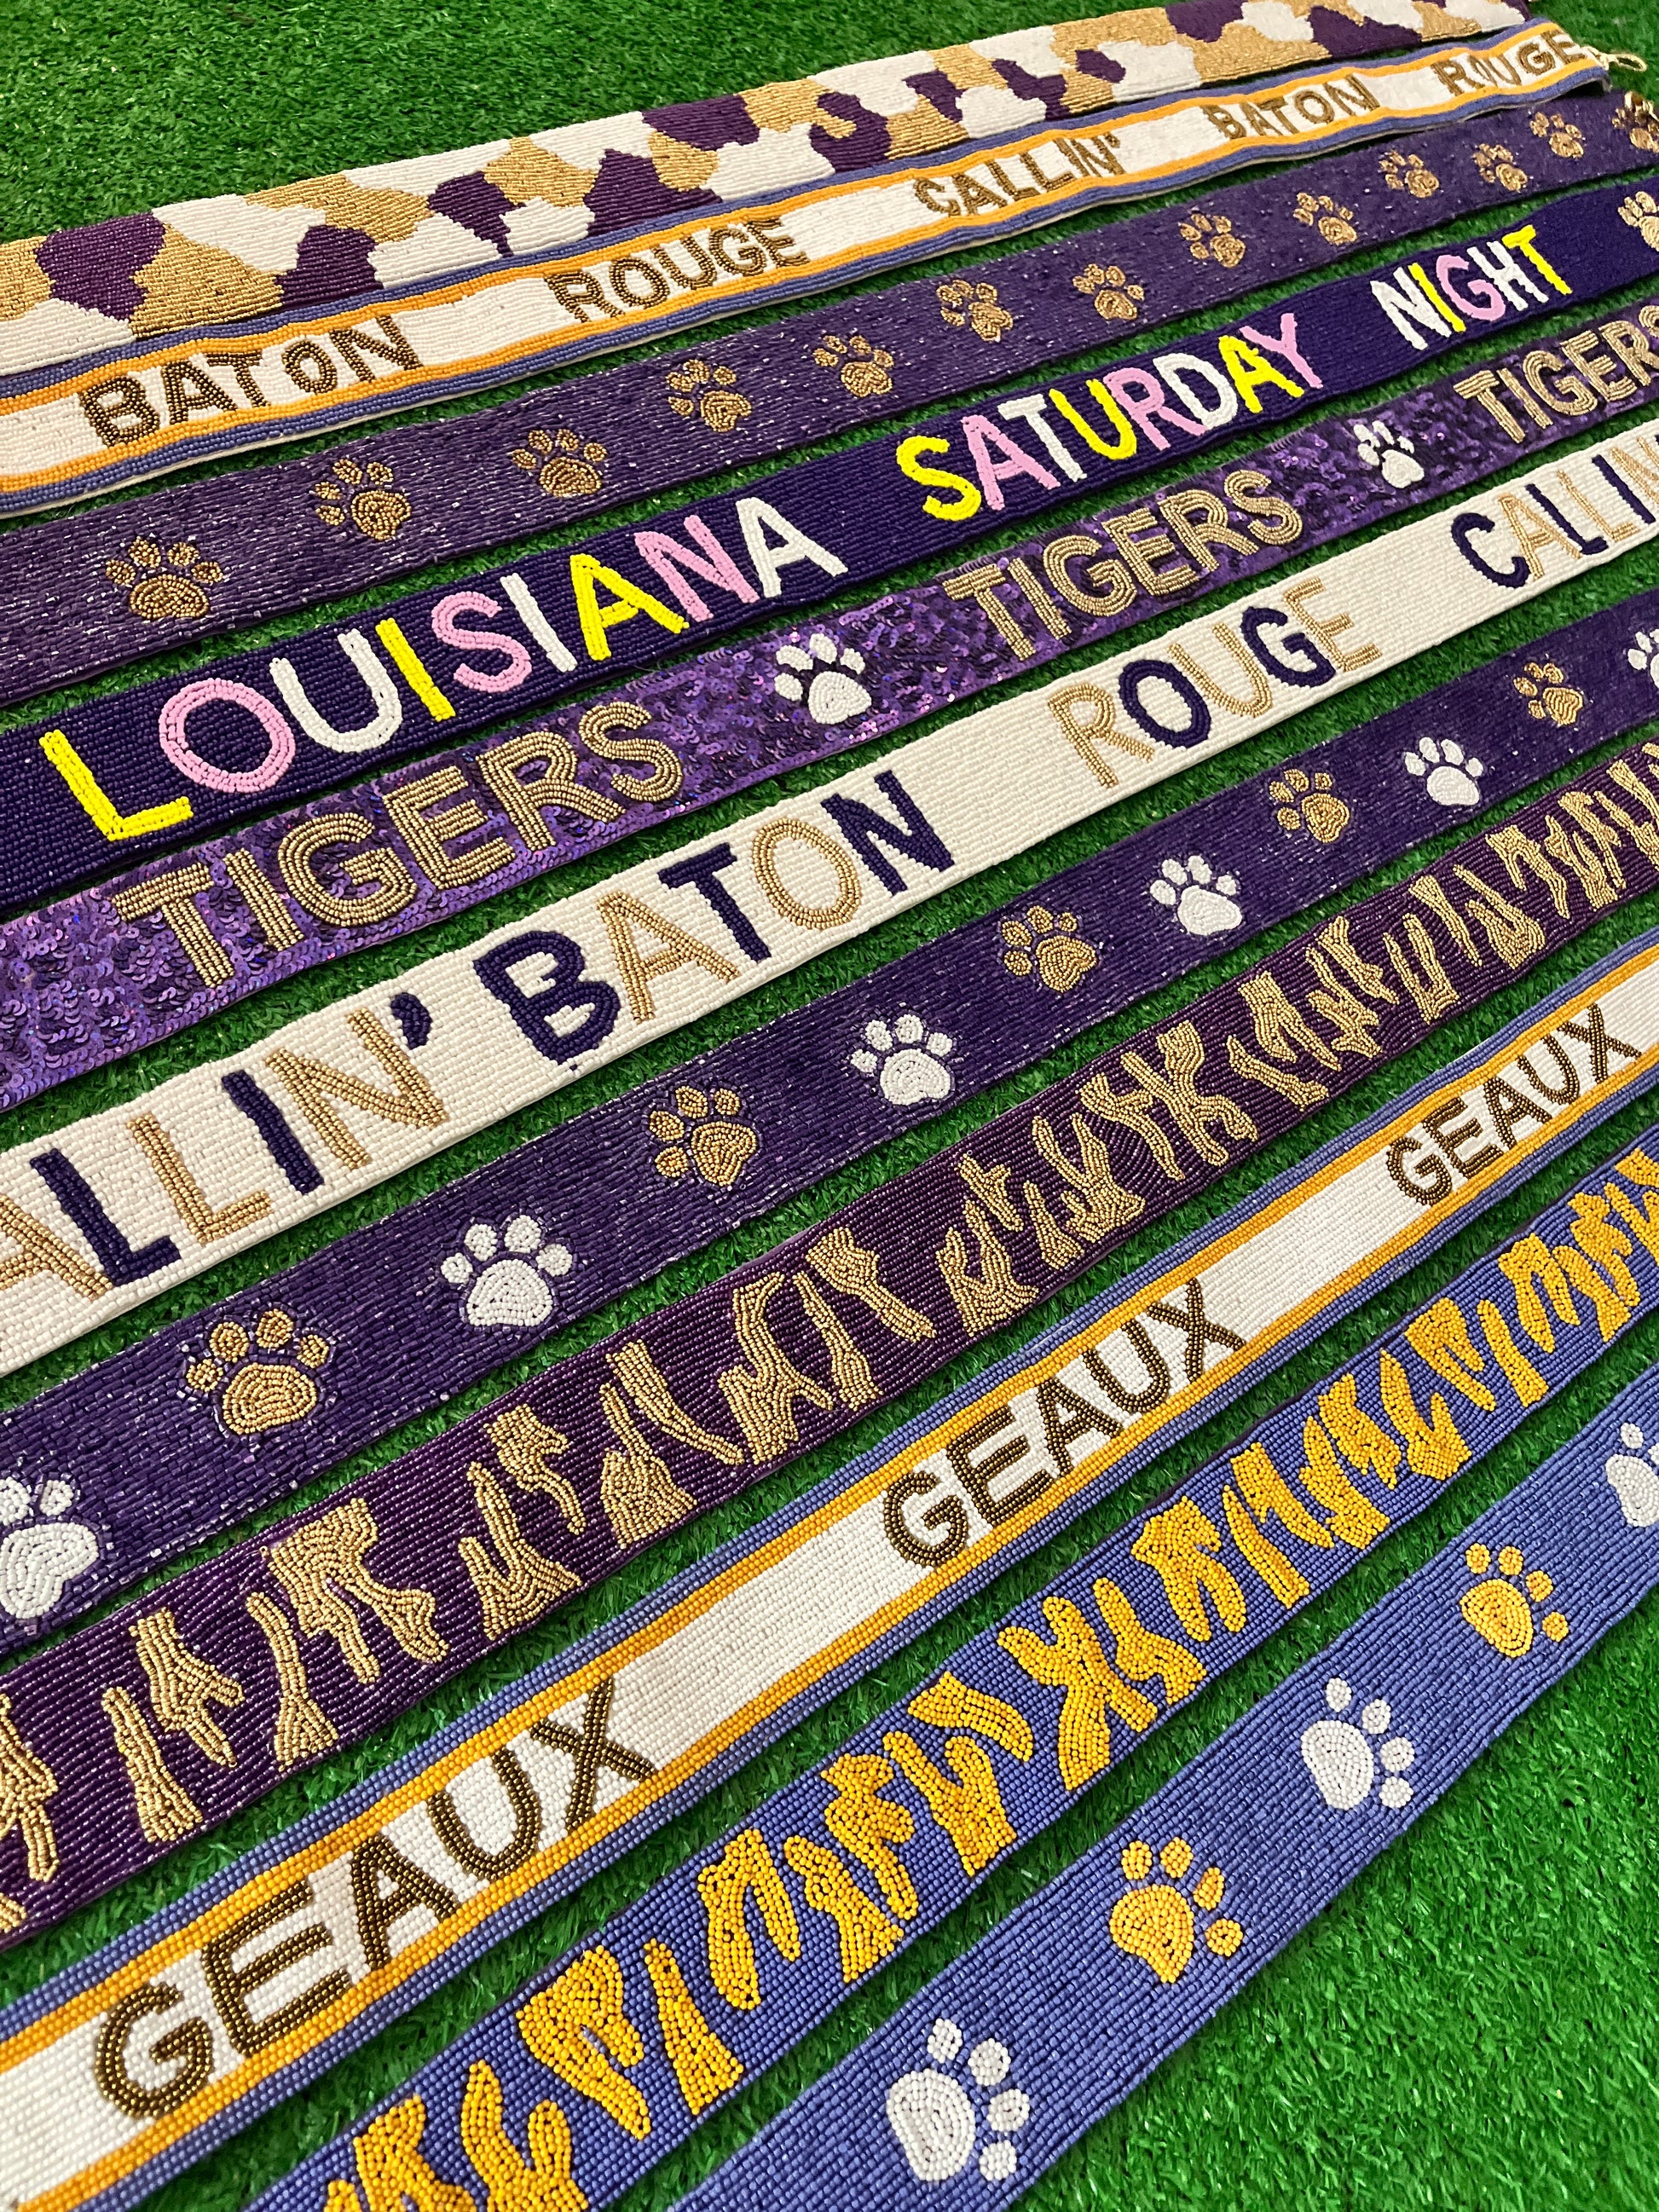 Our Beaded Purse Strap - Purple/Gold Geaux Tru Colors Gameday are  functional modern, fashionable, and affordable price